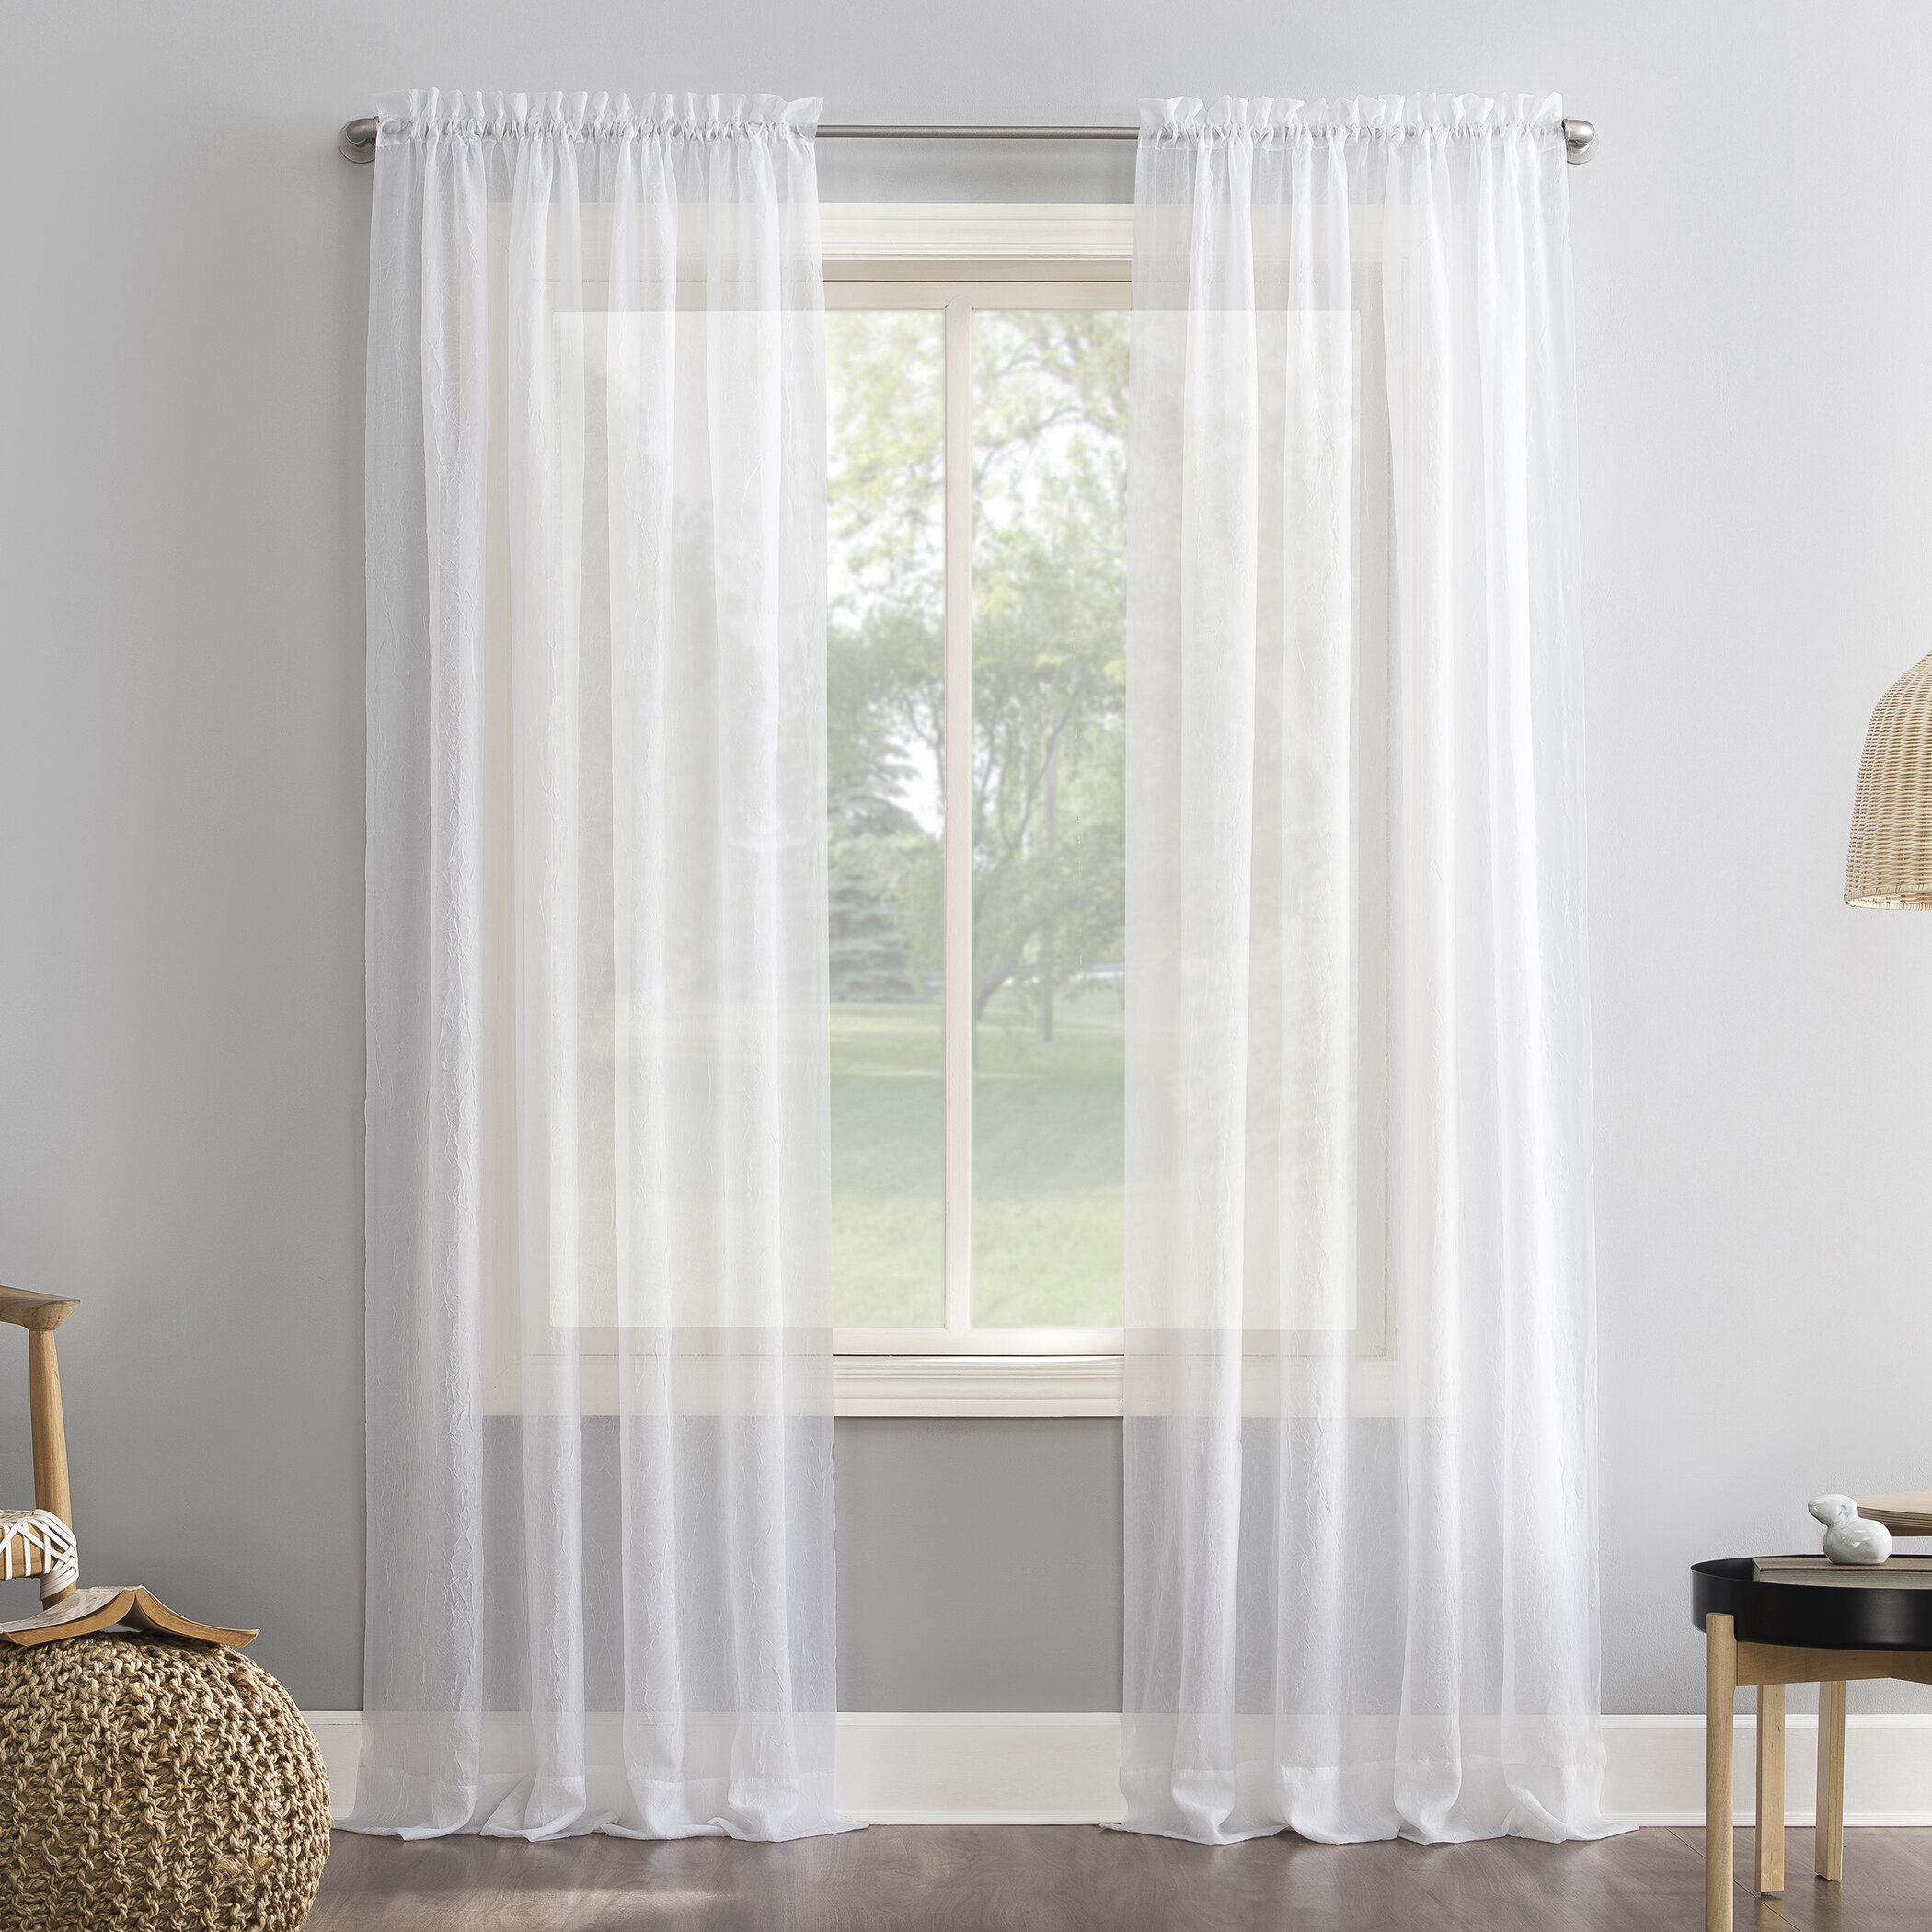 Details about   1/2/4 Panels Window Sheer Curtains Voile Rod Pocket Solid Multi Color & 3 Sizes 